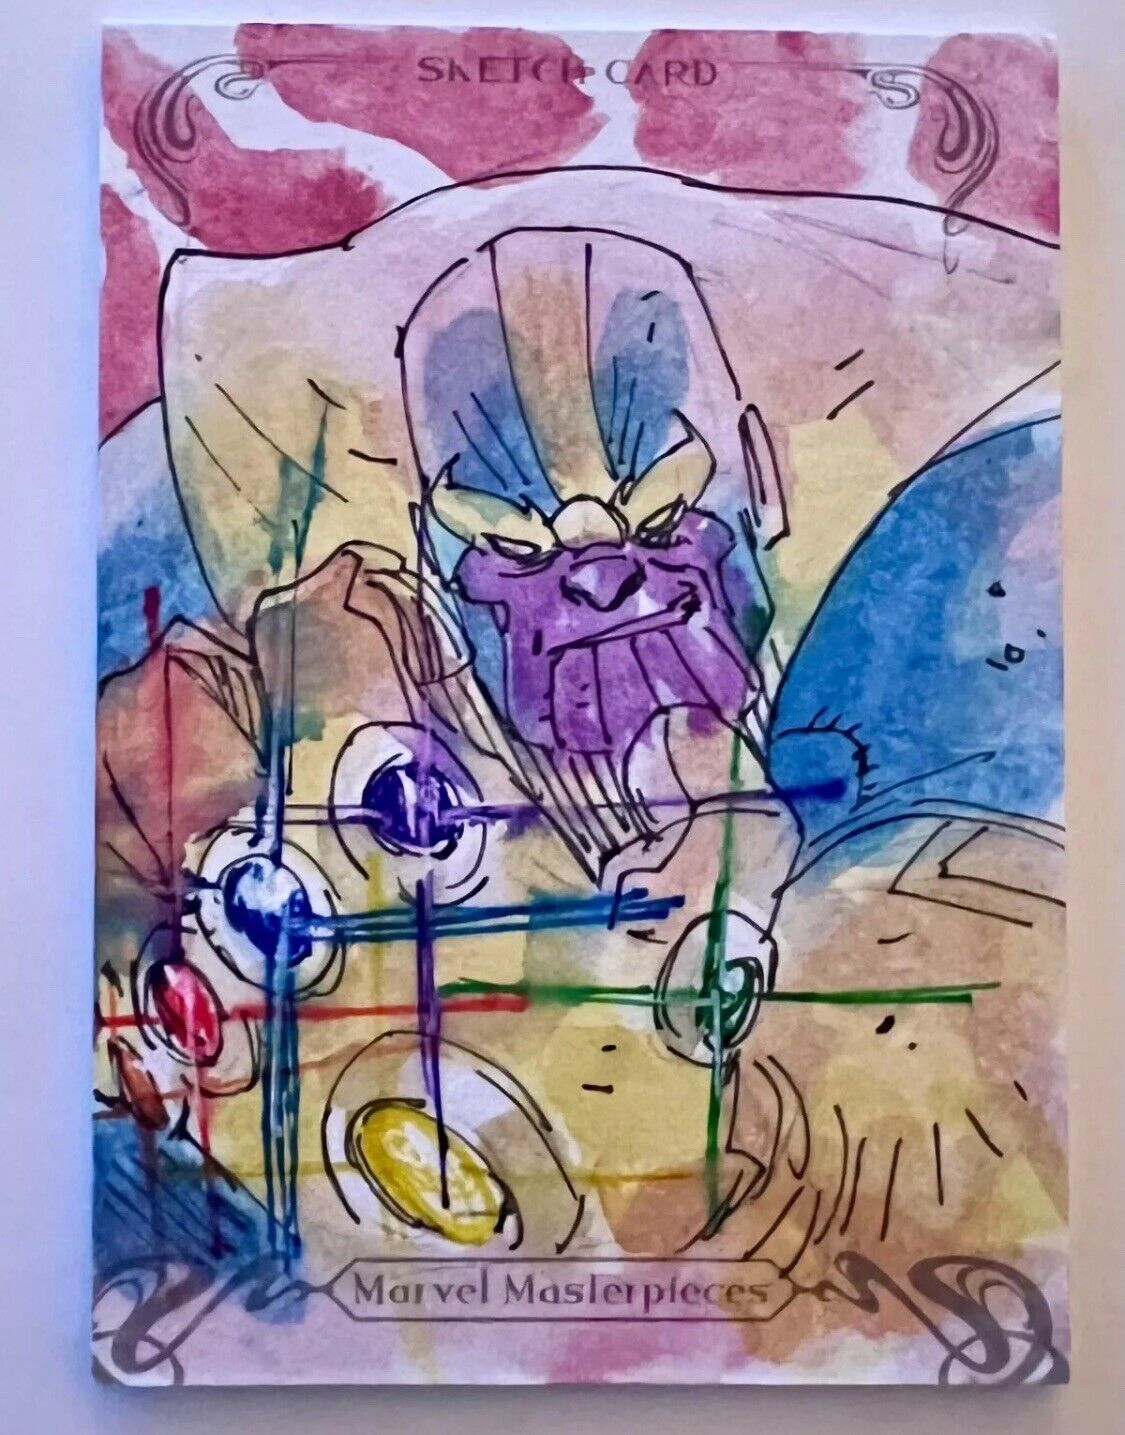 2018 UD Marvel Masterpieces Sketch Card Thanos By Felix Morales - One Of One